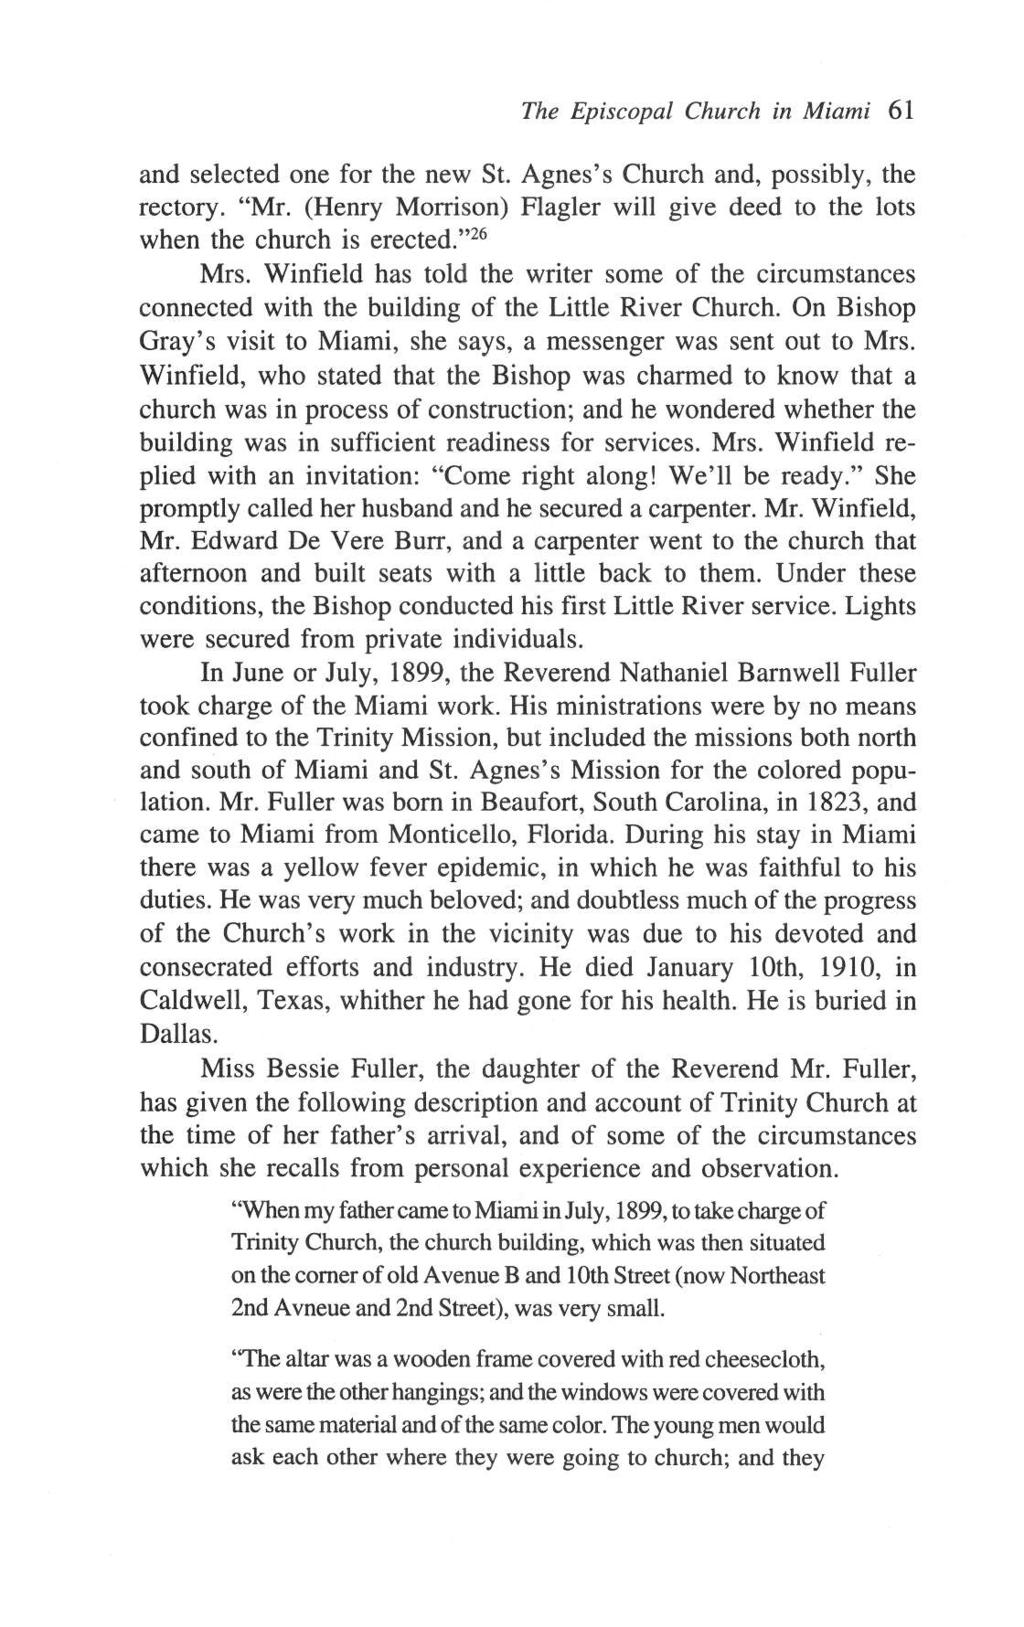 The Episcopal Church in Miami 61 and selected one for the new St. Agnes's Church and, possibly, the rectory. "Mr. (Henry Morrison) Flagler will give deed to the lots when the church is erected.